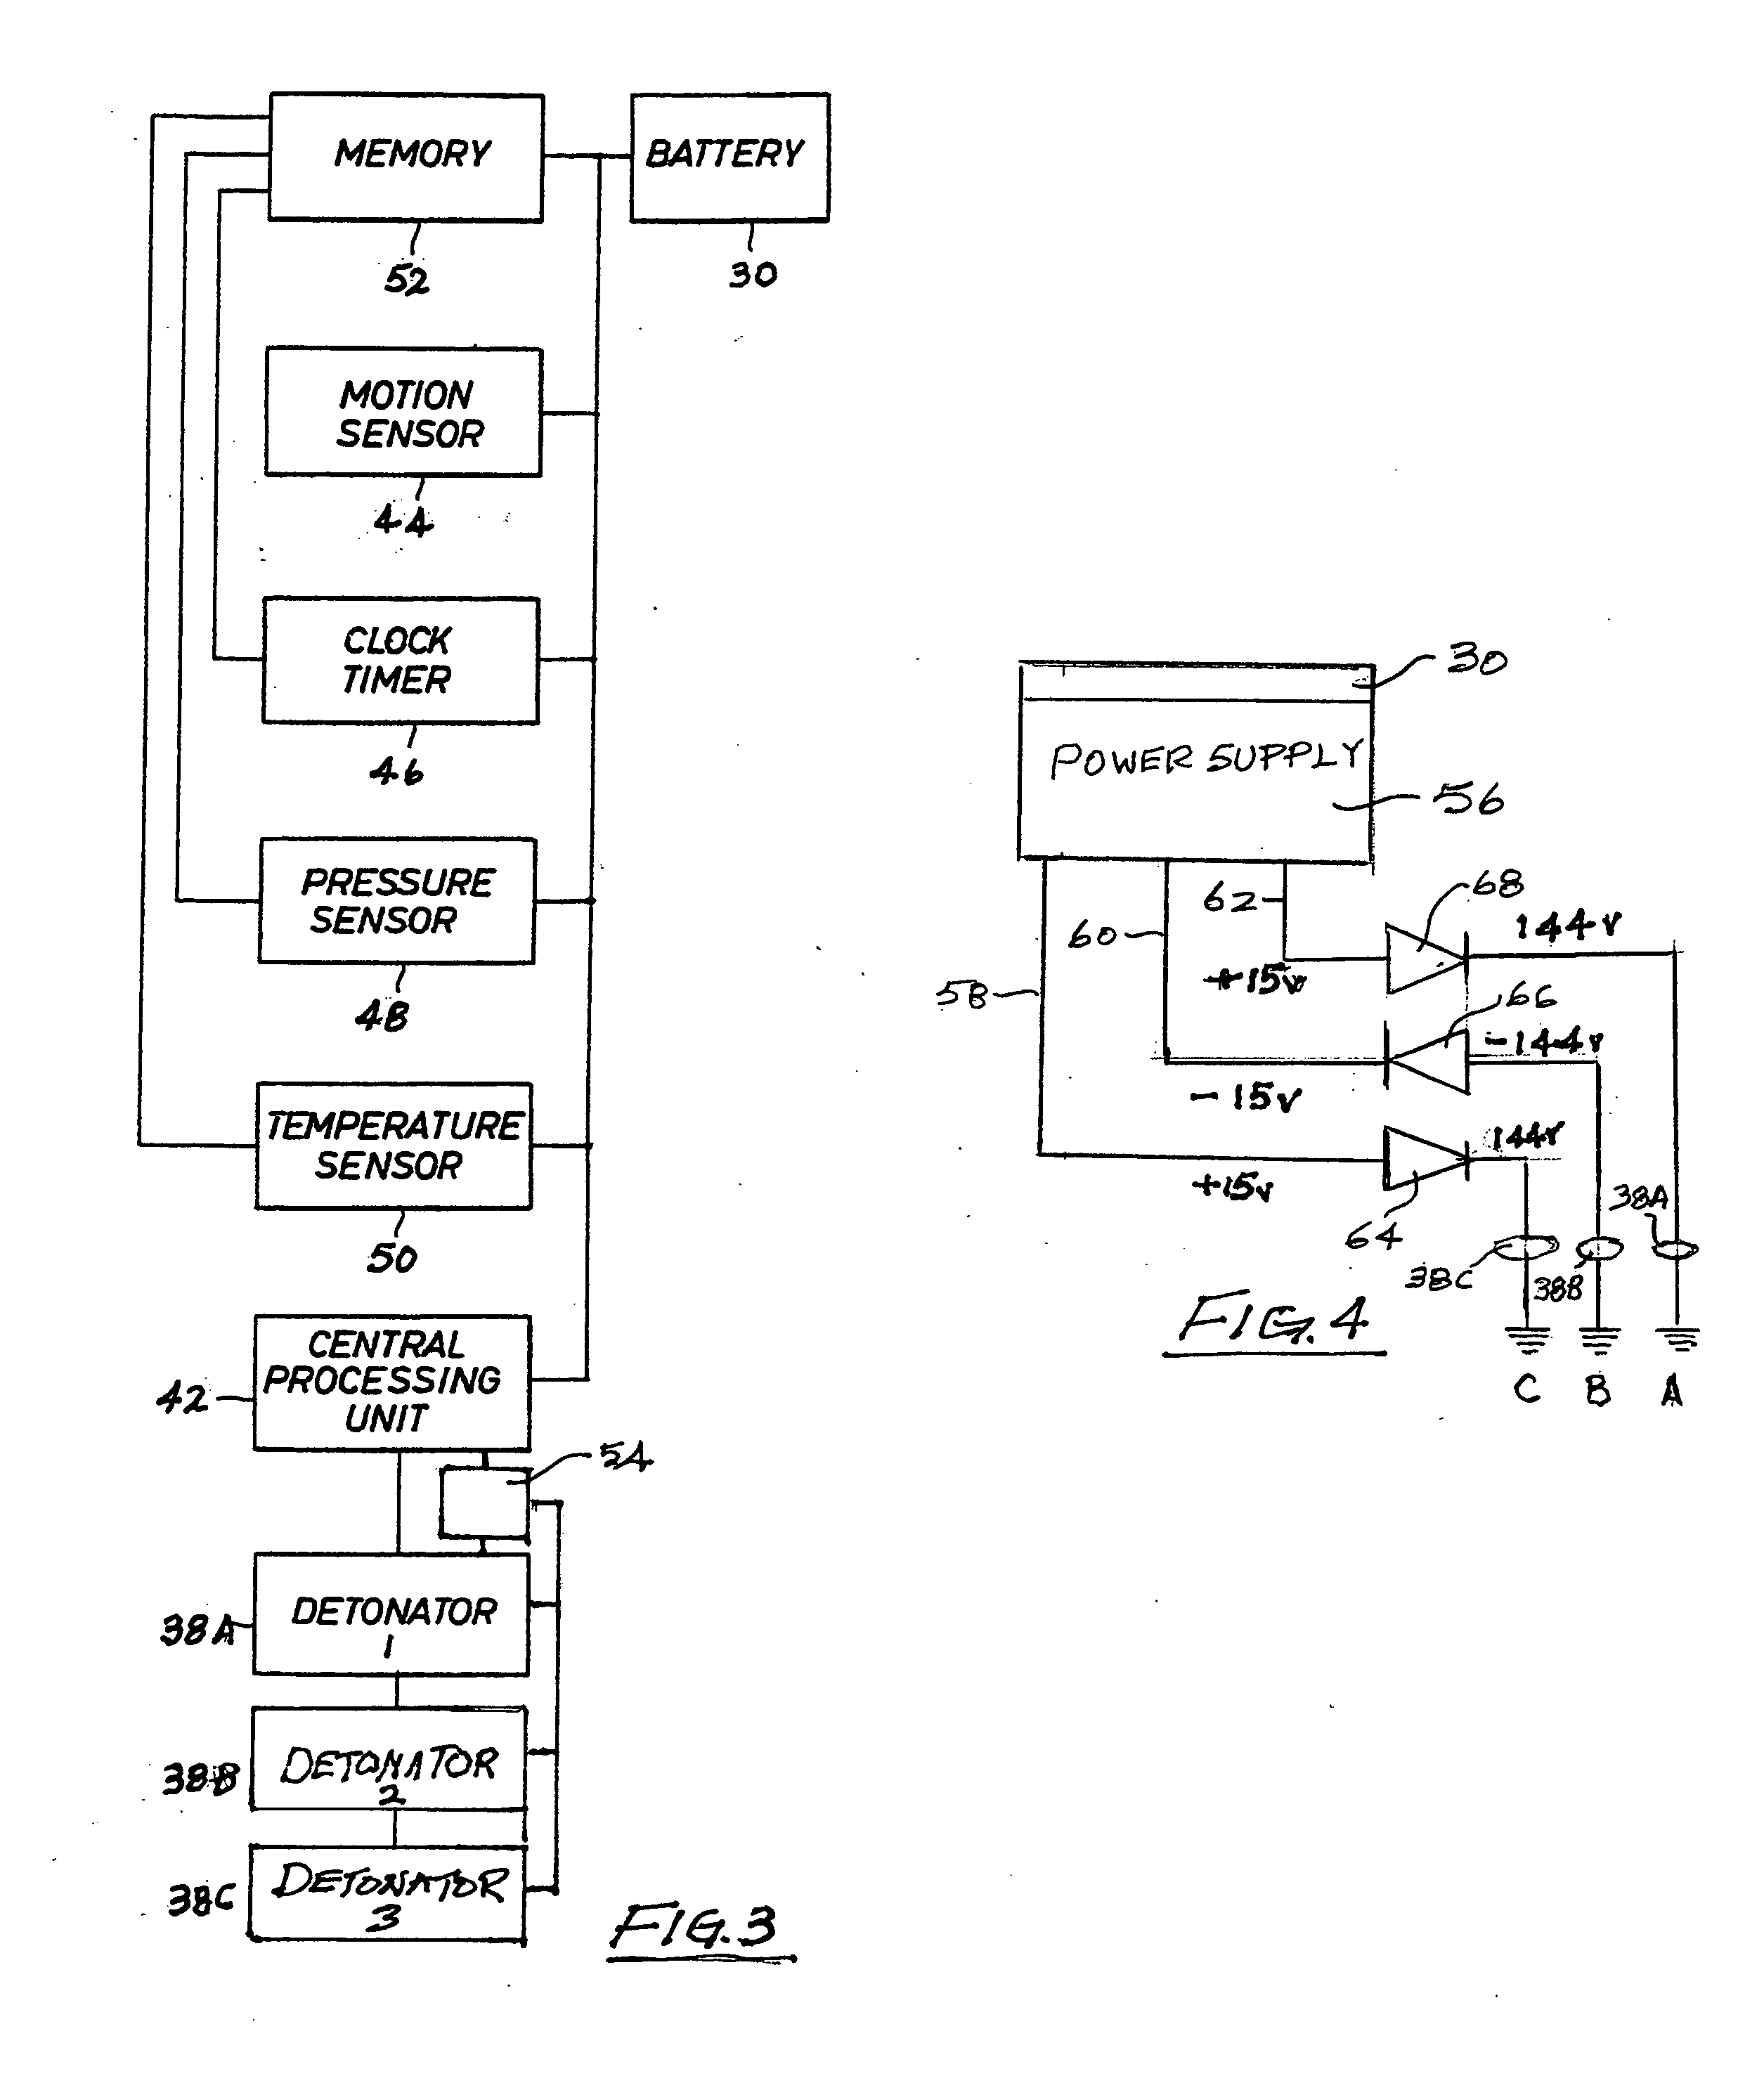 Electronic blast control system for multiple downhole operations